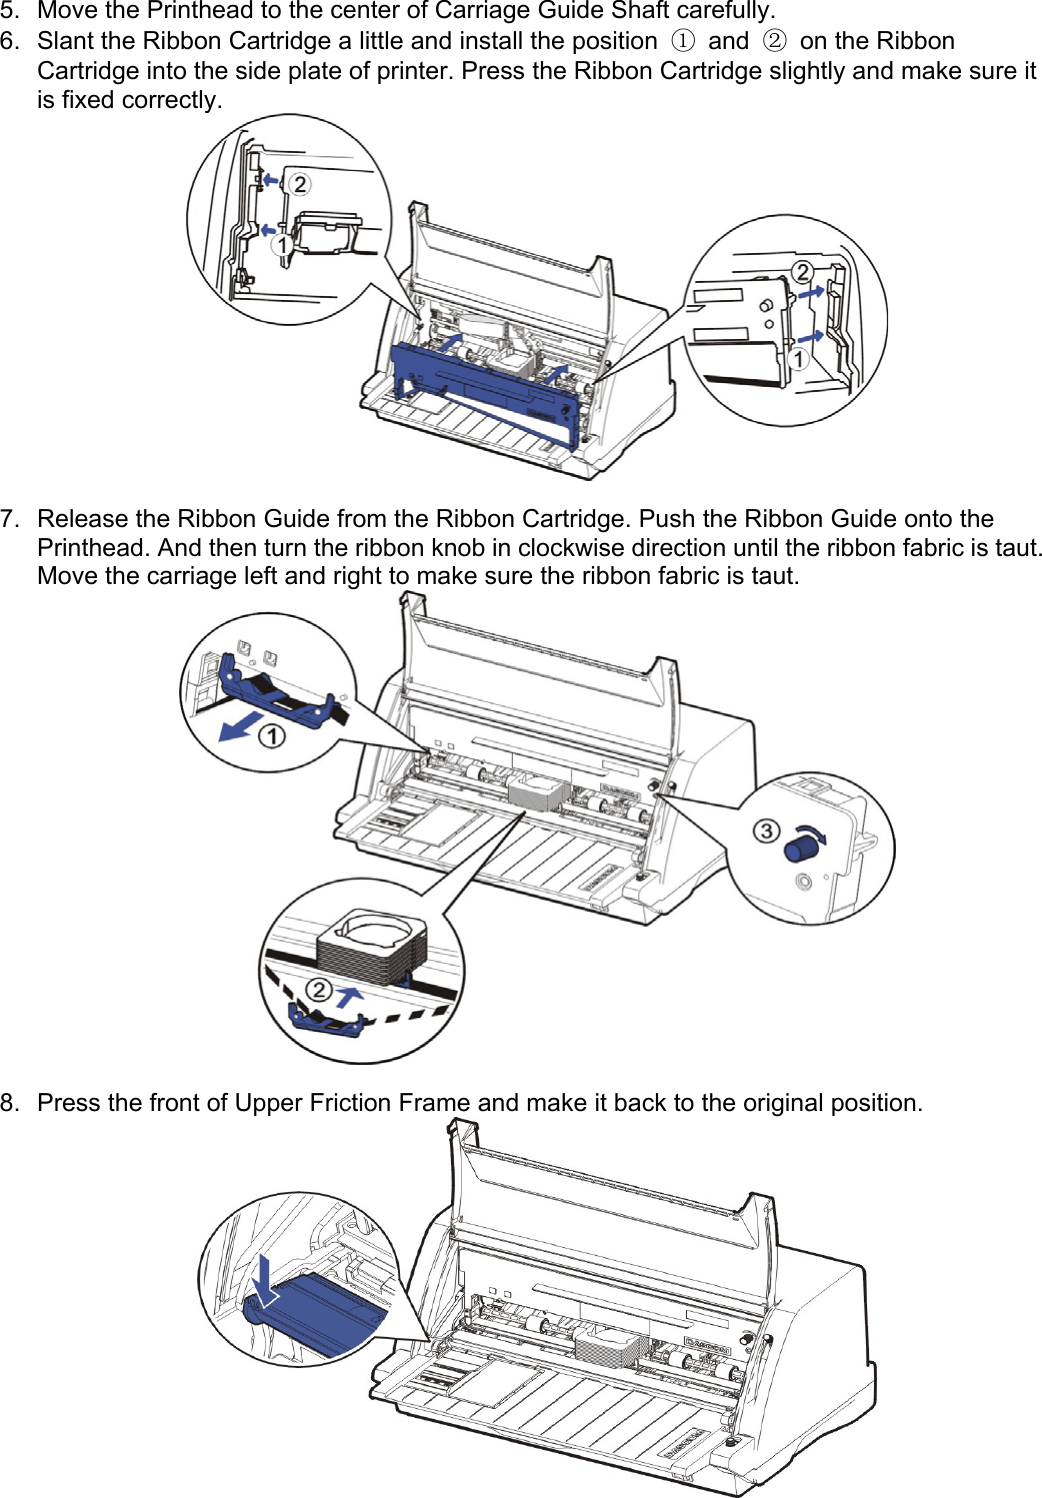     5.  Move the Printhead to the center of Carriage Guide Shaft carefully. 6.  Slant the Ribbon Cartridge a little and install the position  ① and ②  on the Ribbon Cartridge into the side plate of printer. Press the Ribbon Cartridge slightly and make sure it is fixed correctly.     7.  Release the Ribbon Guide from the Ribbon Cartridge. Push the Ribbon Guide onto the Printhead. And then turn the ribbon knob in clockwise direction until the ribbon fabric is taut. Move the carriage left and right to make sure the ribbon fabric is taut.   8.  Press the front of Upper Friction Frame and make it back to the original position.   